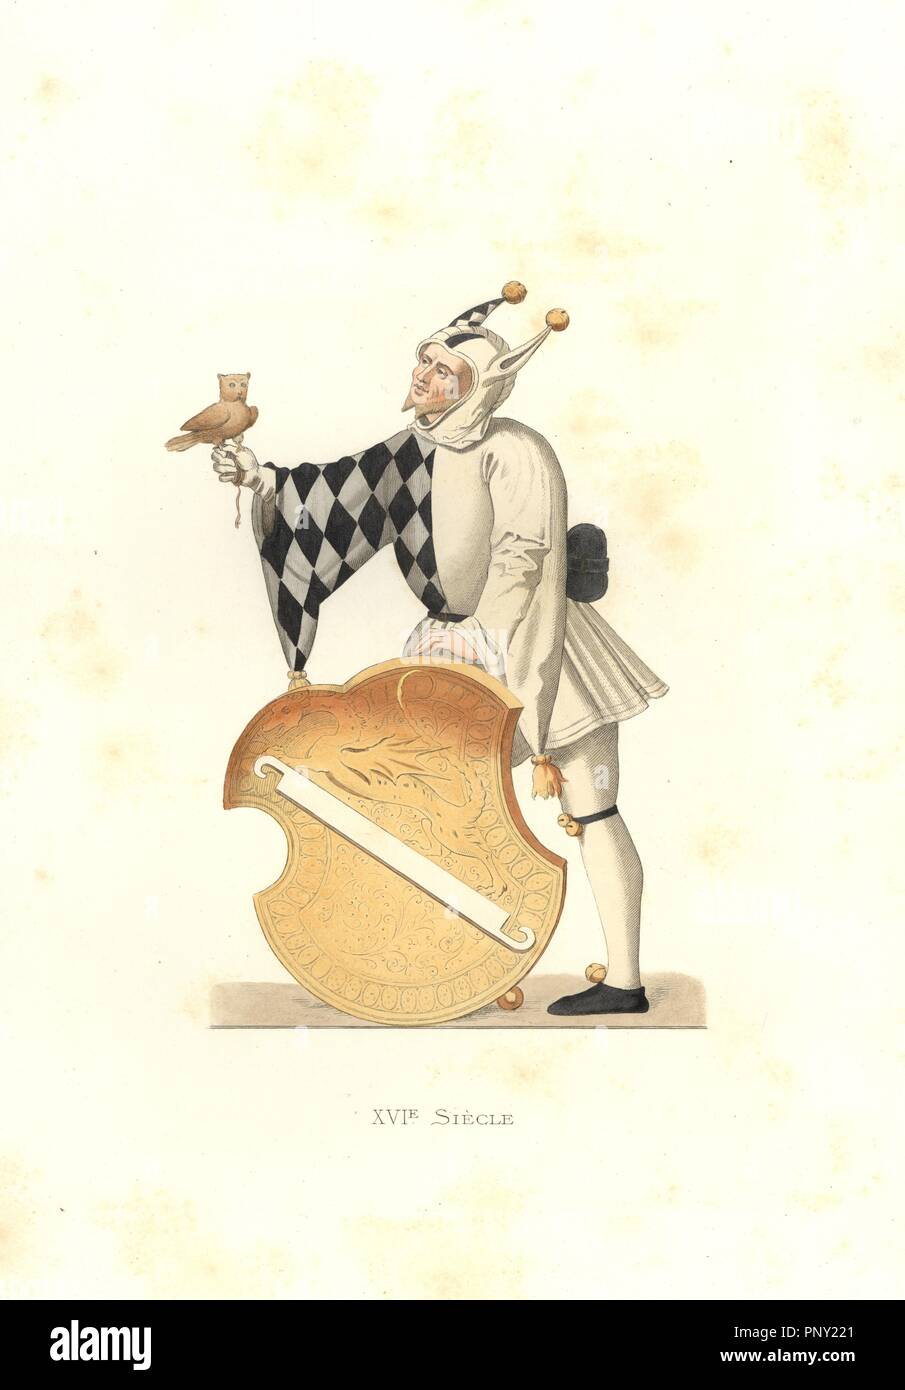 Bartklime Linck, Swiss clown, 1533. Handcolored illustration by E. Lechevallier-Chevignard, lithographed by A. Didier, L. Flameng, F. Laguillermie, from Georges Duplessis's 'Costumes historiques des XVIe, XVIIe et XVIIIe siecles' (Historical costumes of the 16th, 17th and 18th centuries), Paris 1867. The book was a continuation of the series on the costumes of the 12th to 15th centuries published by Camille Bonnard and Paul Mercuri from 1830. Georges Duplessis (1834-1899) was curator of the Prints department at the Bibliotheque nationale. Edmond Lechevallier-Chevignard (1825-1902) was an artis Stock Photo